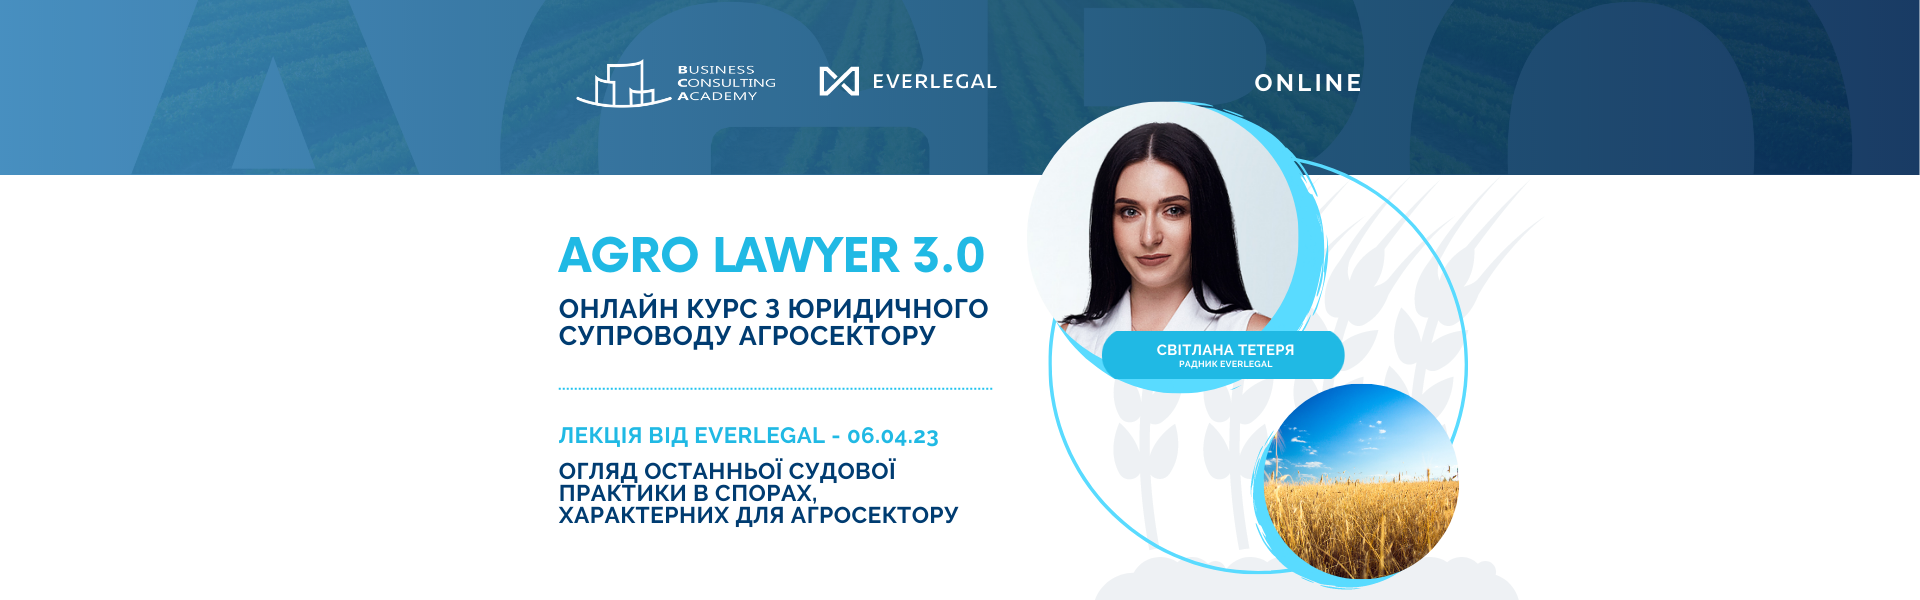 Online course on legal support of the agricultural sector AGRO LAWYER 3.0